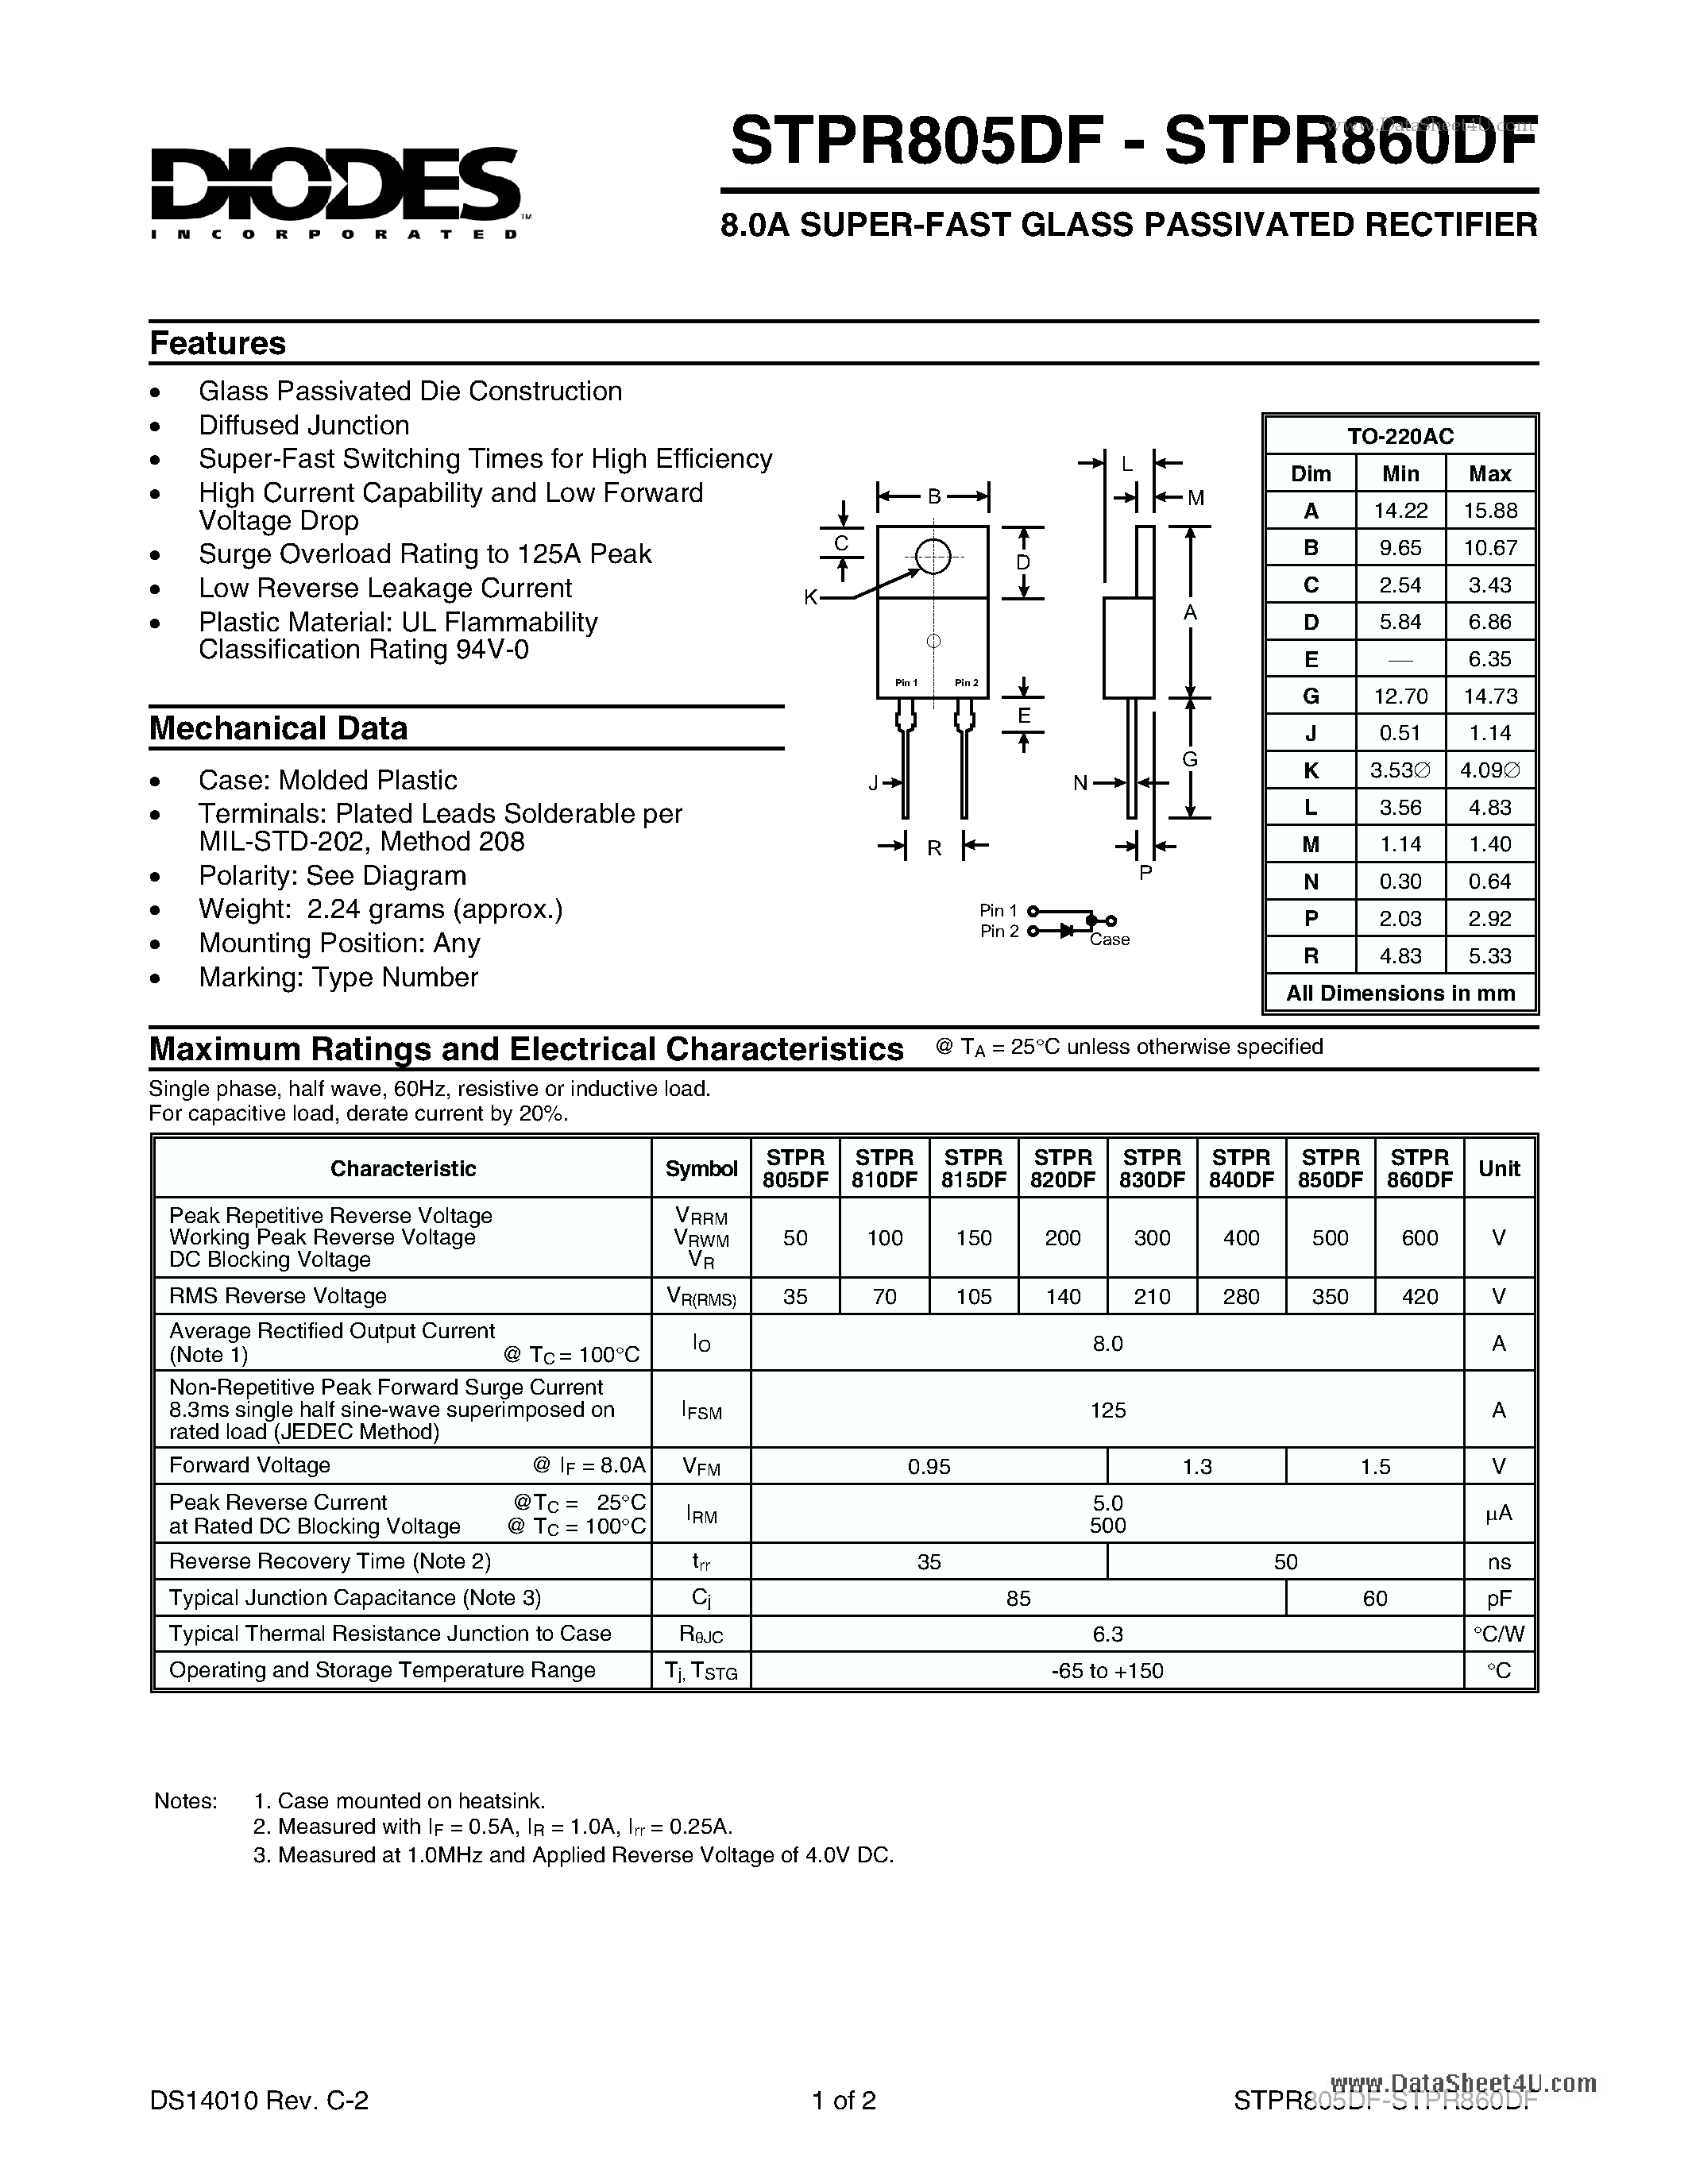 Datasheet STPR805DF - 8.0A SUPER-FAST GLASS PASSIVATED RECTIFIER page 1